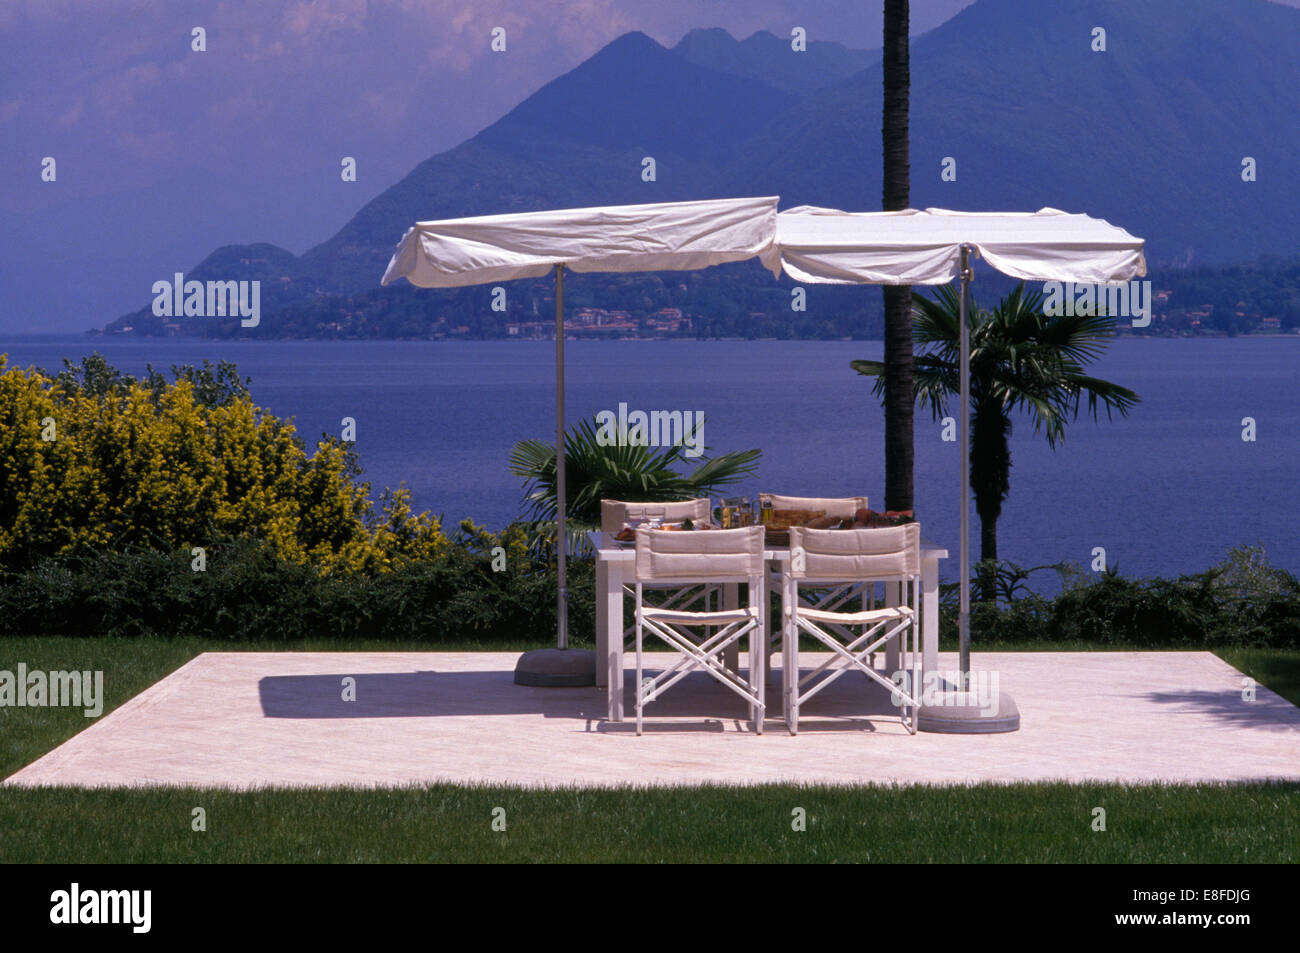 White umbrellas above white chairs and table on stone terrace overlooking the sea off the coast of Corsica Stock Photo